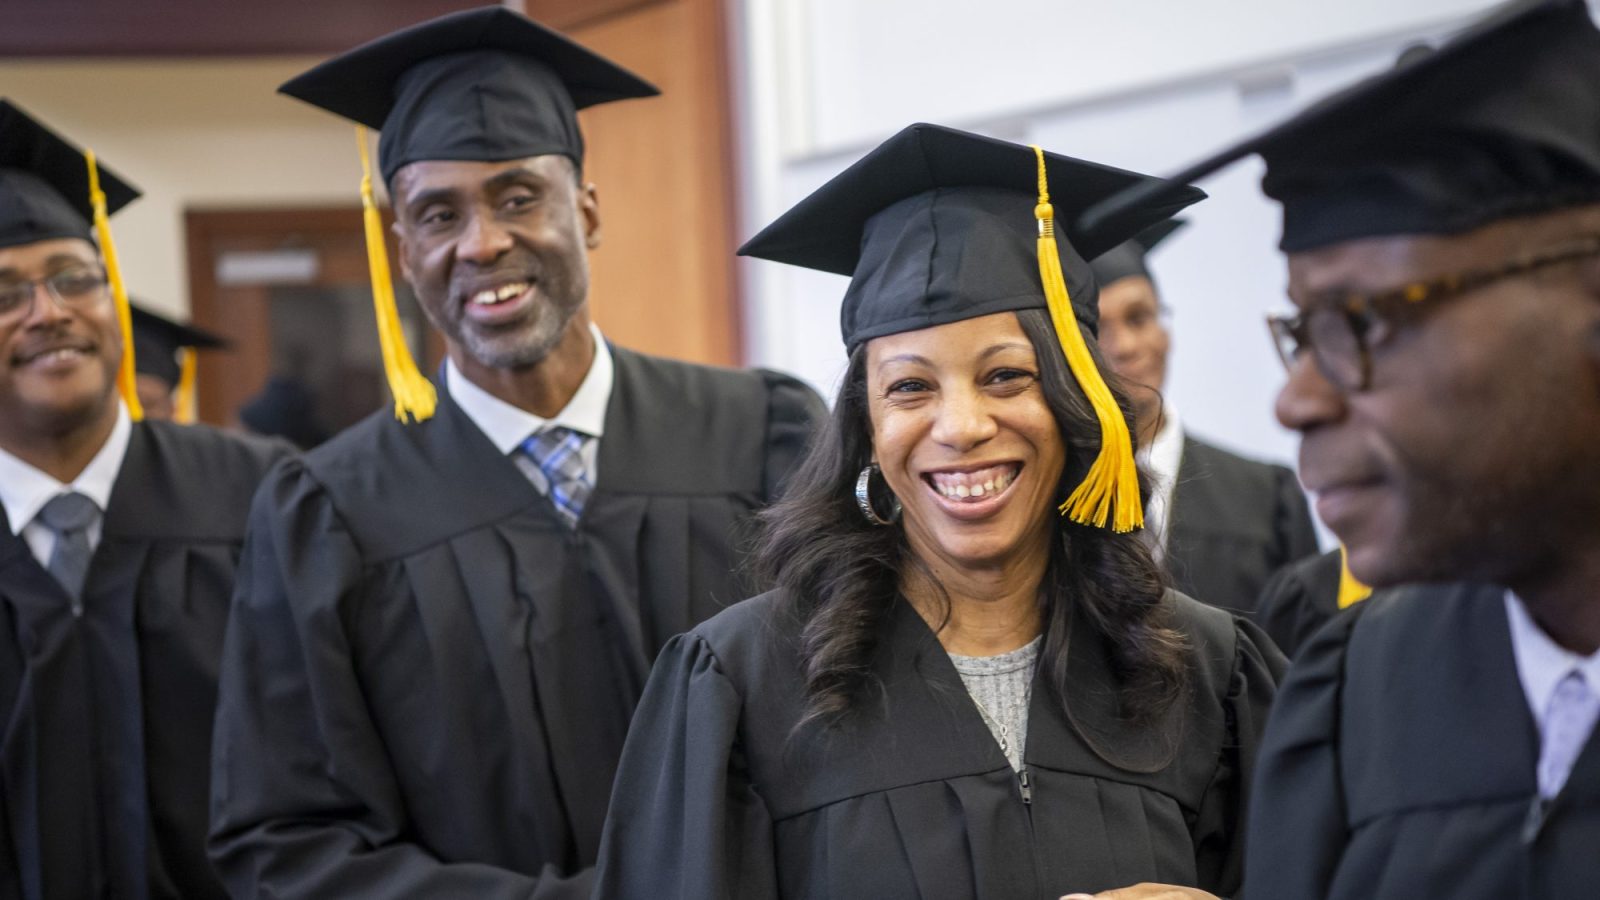 A group of returning citizens wear black graduation robes and caps with yellow tassels dangling on one side. They are smiling during an event celebrating their graduation from Georgetown&#039;s Paralegal Program.